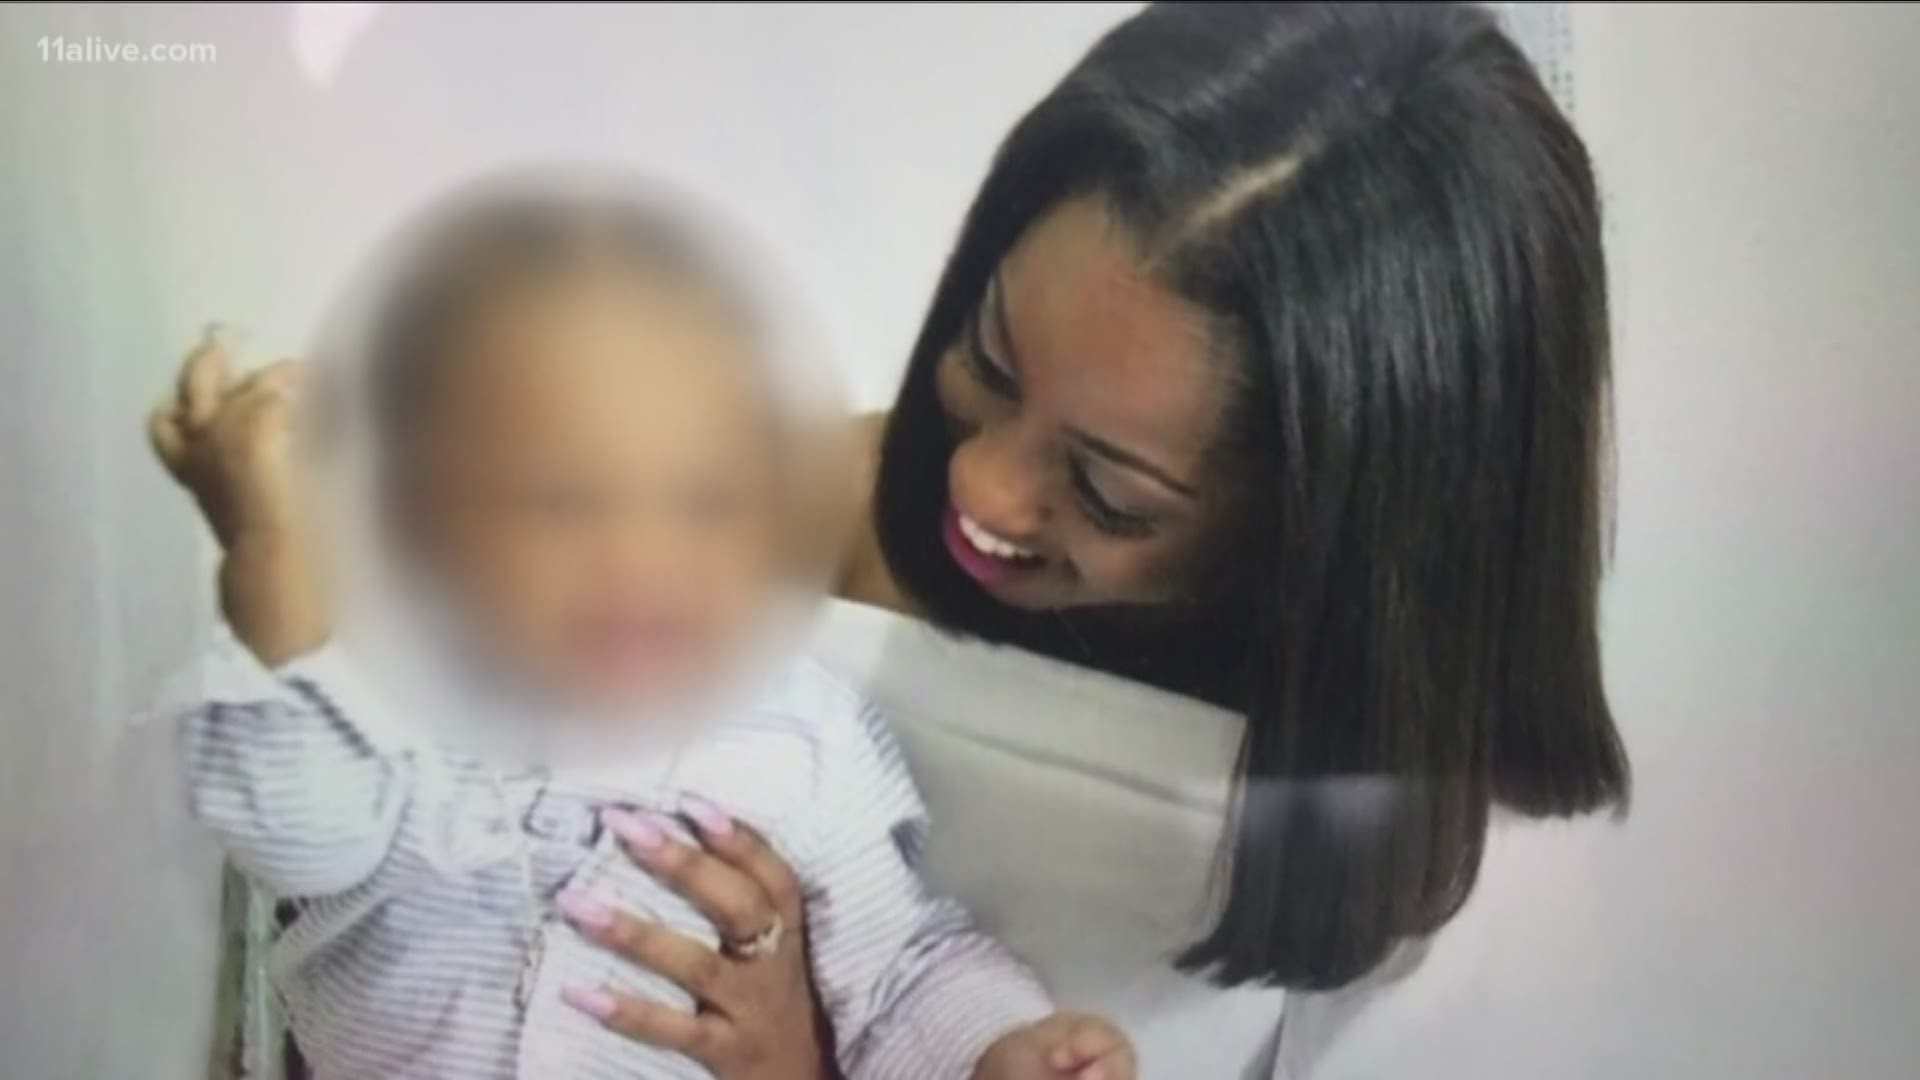 She was killed in front of her 3-year-old son.